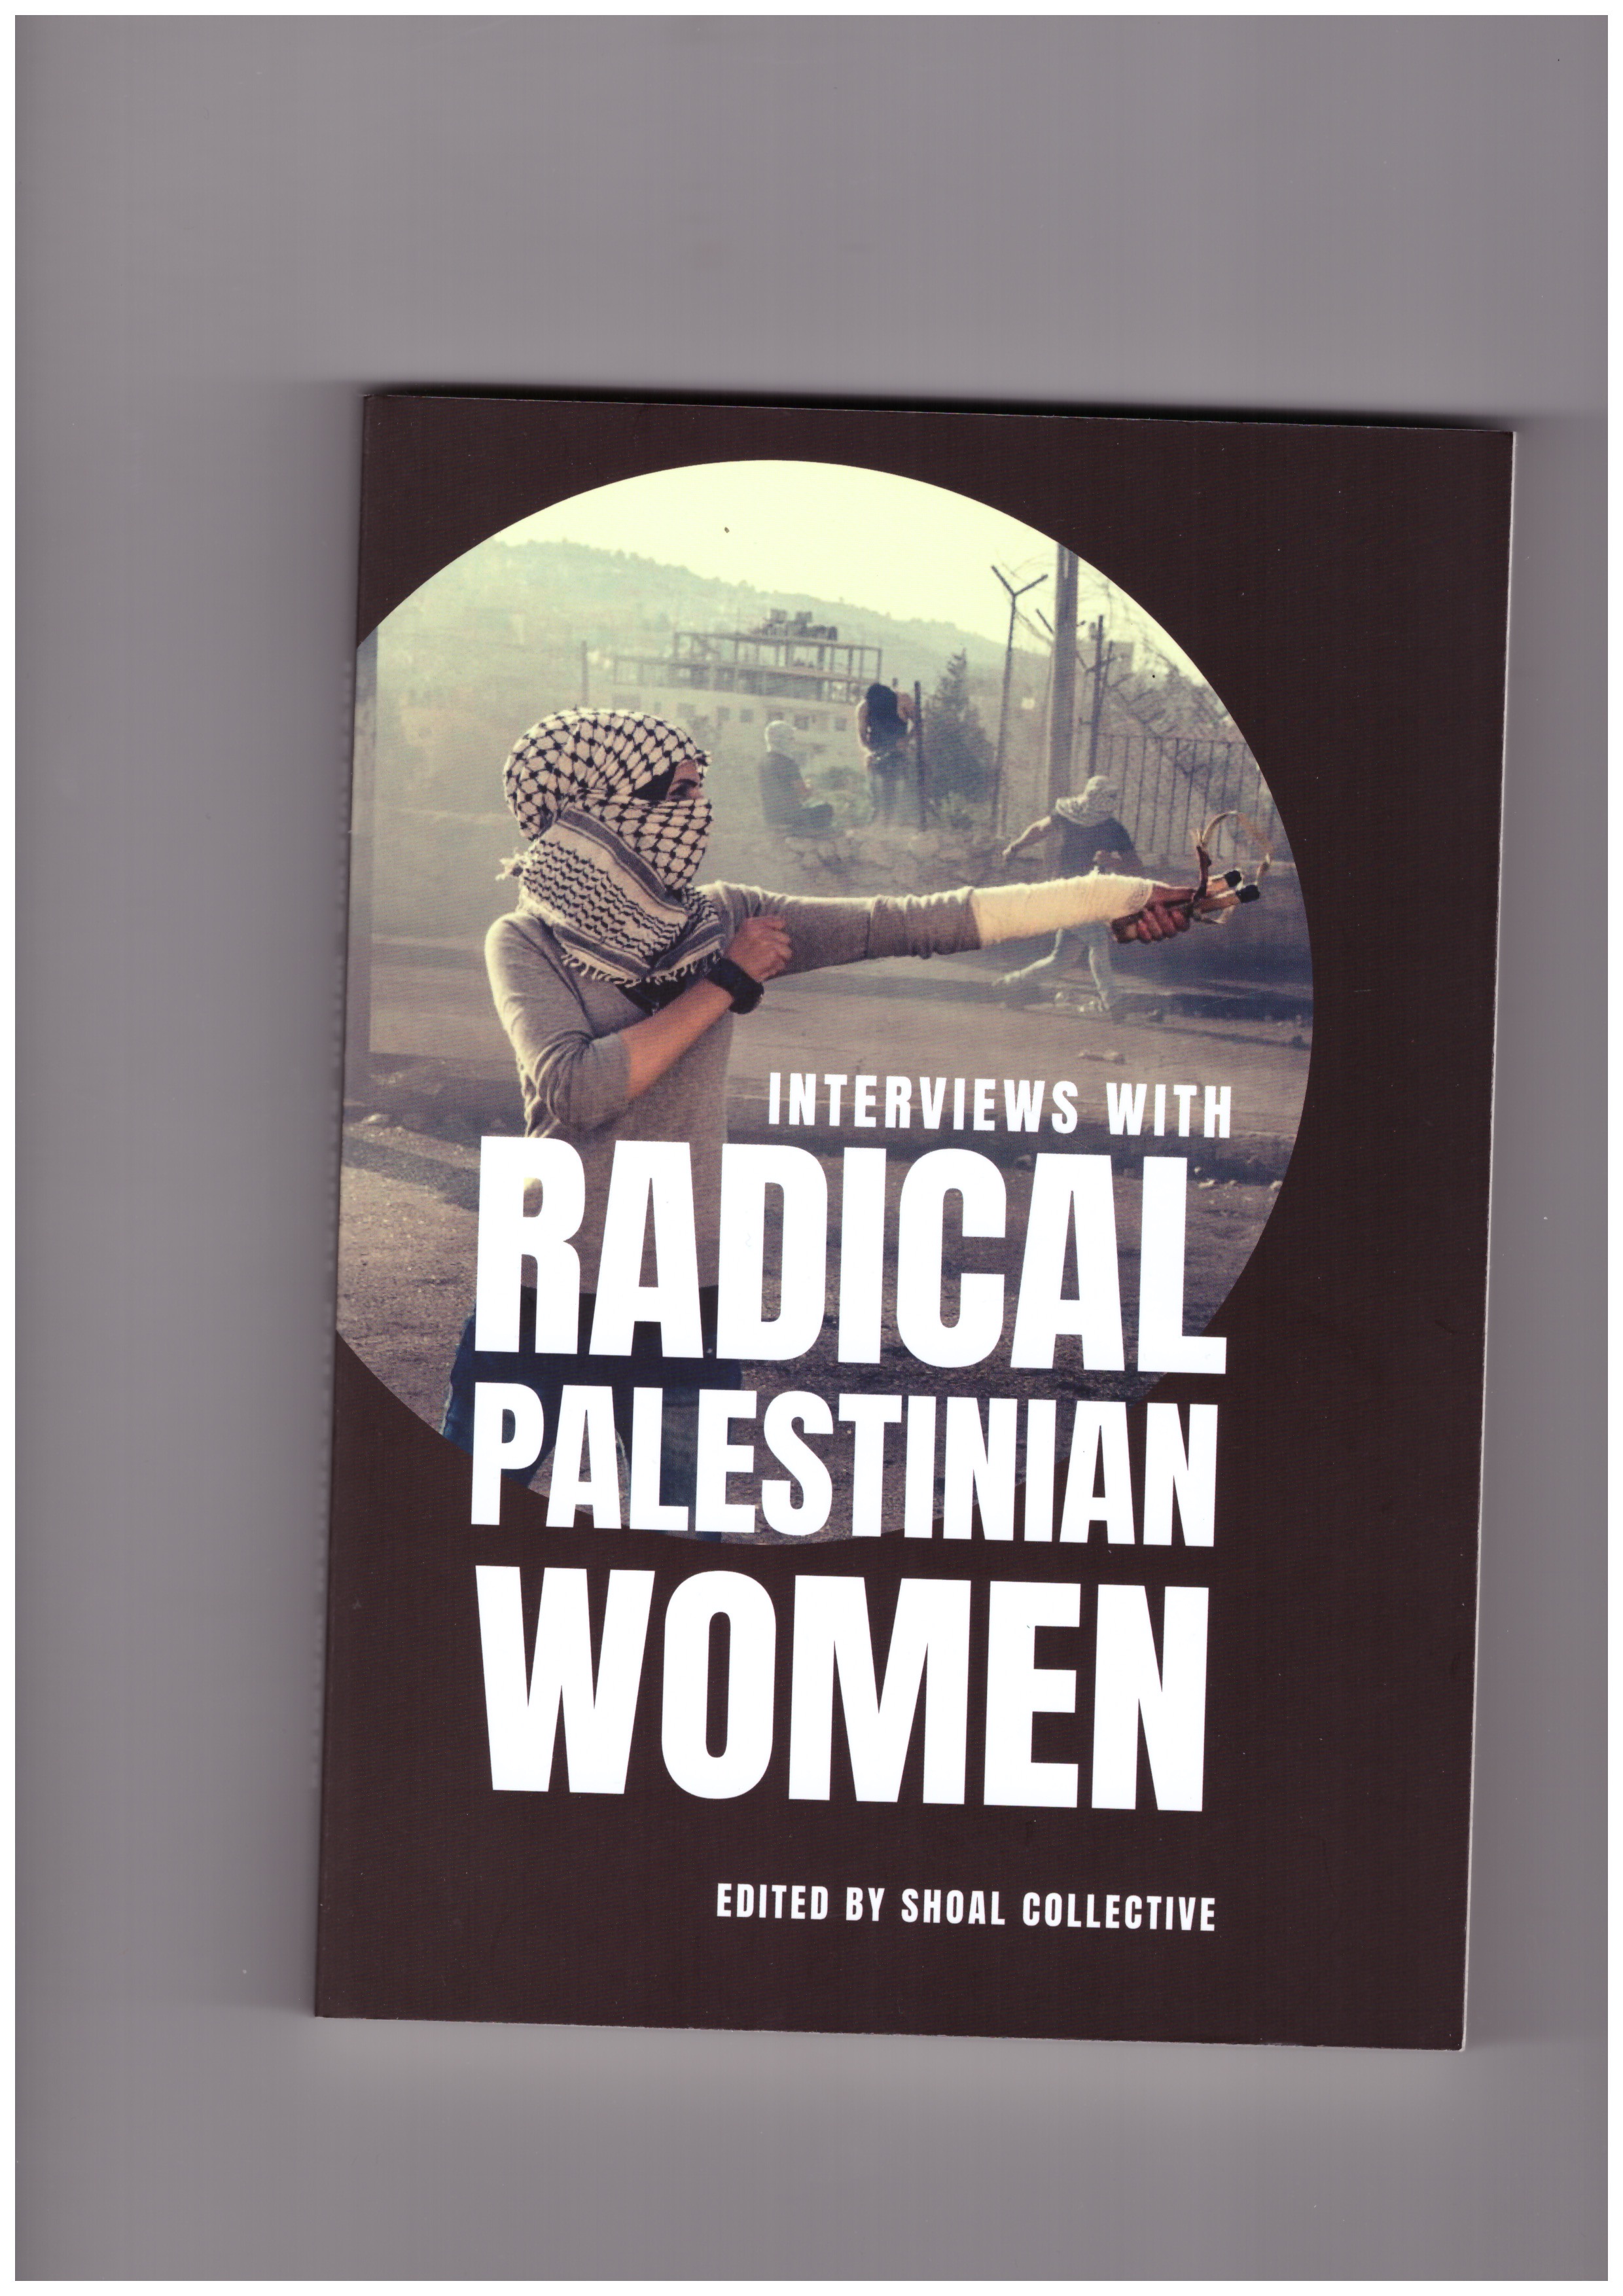 SHOAL COLLECTIVE (ed.) - interviews with Radical Palestinian Women